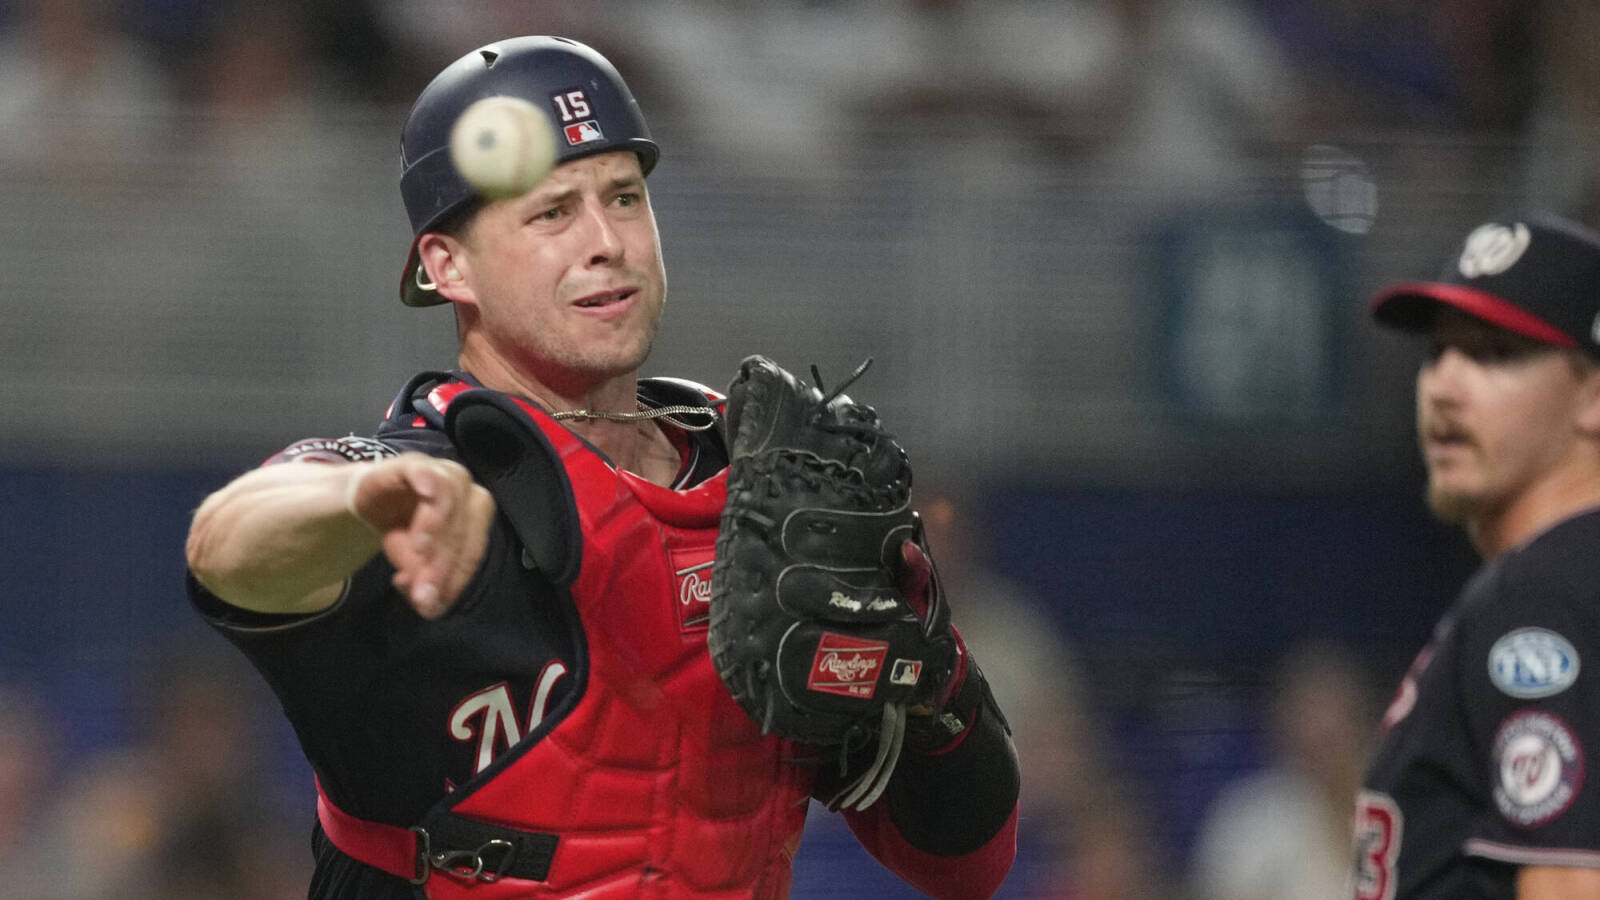 Nationals catcher sent to IL with hamate fracture